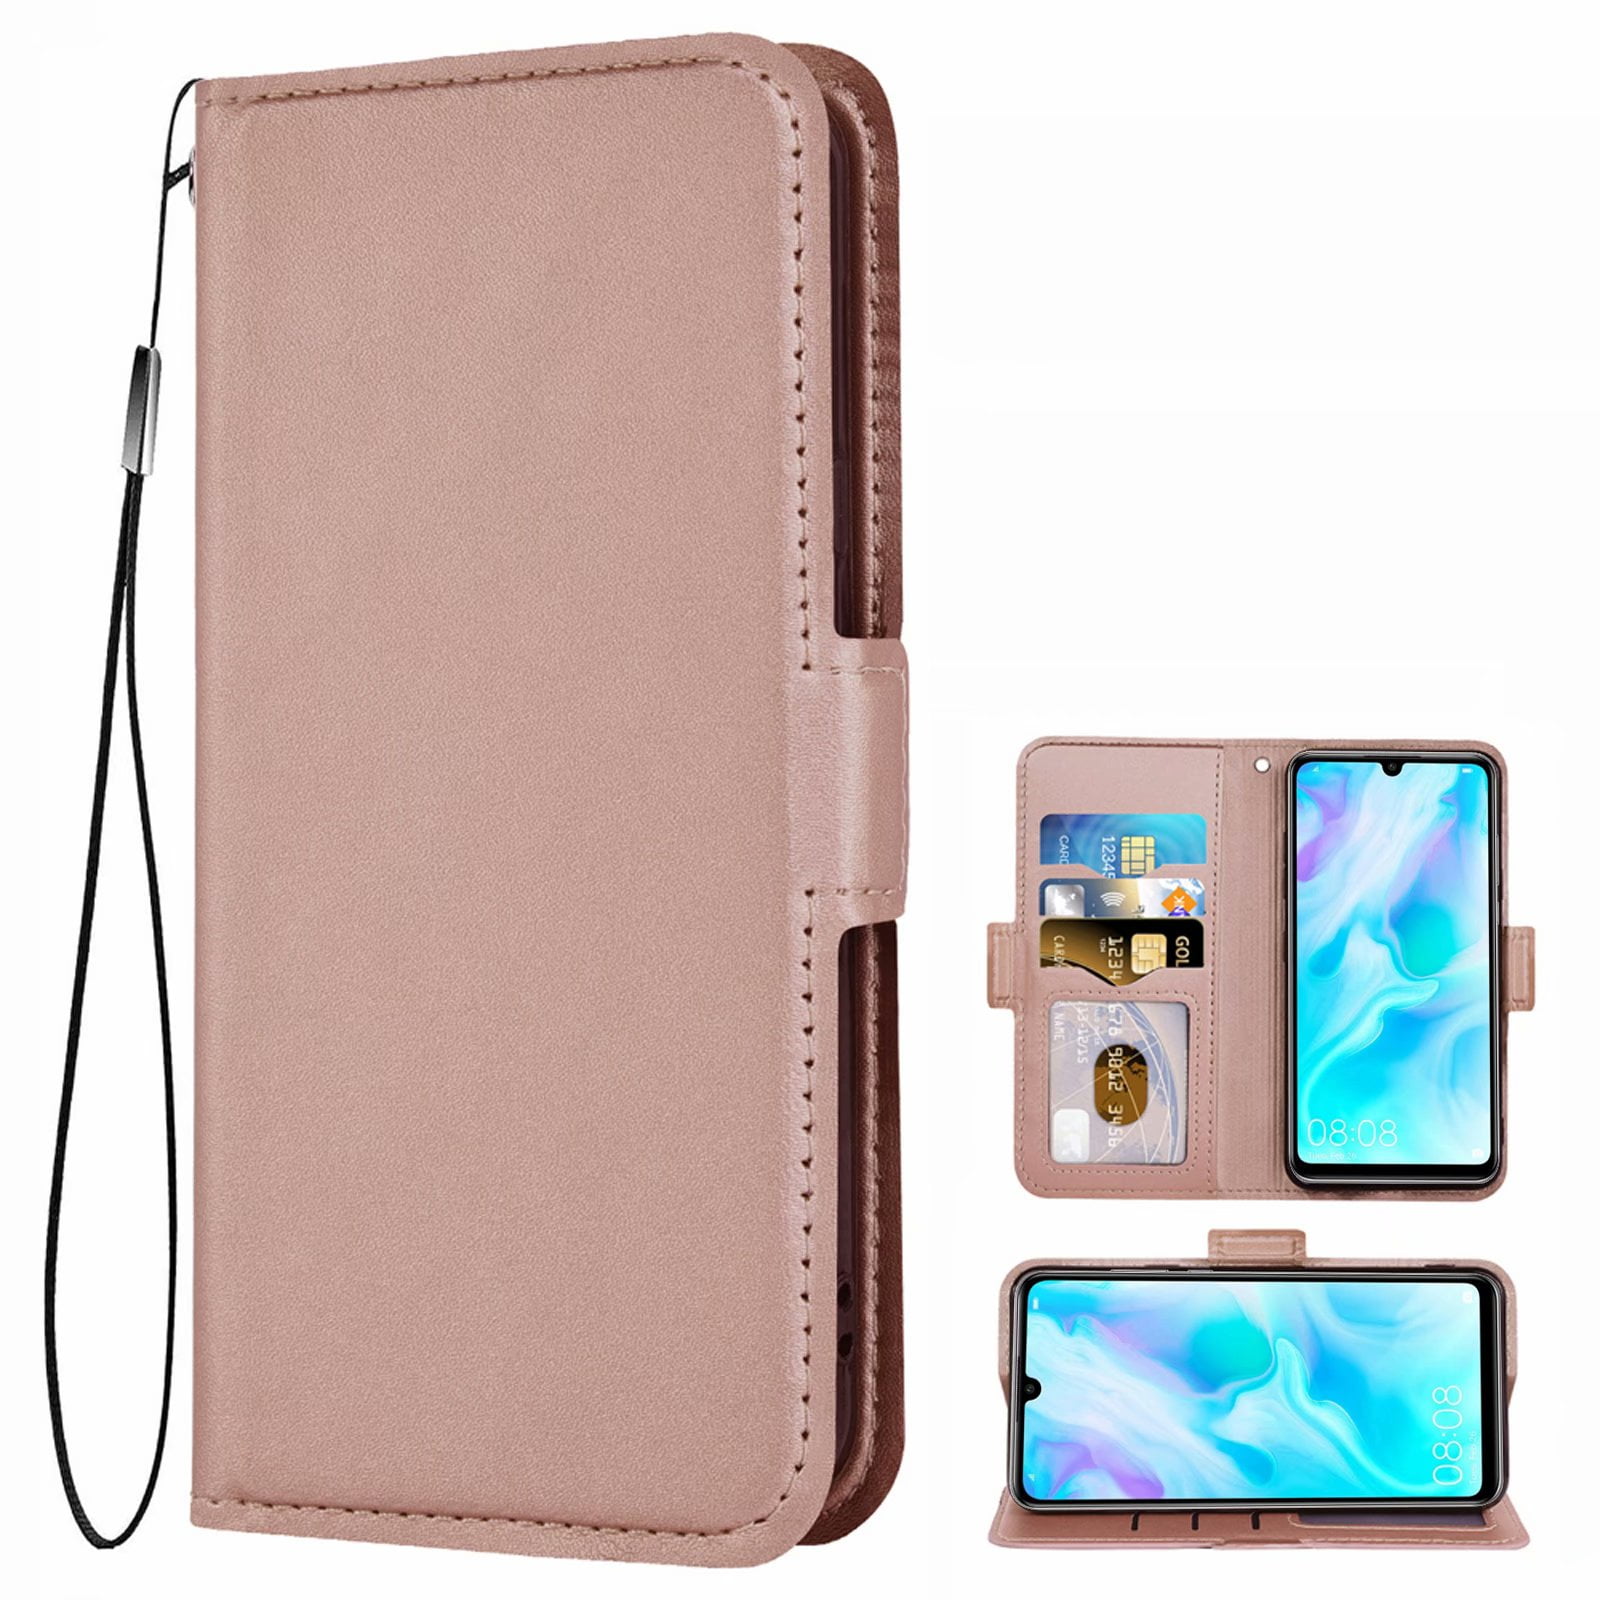 Huawei P30 Flip Case Cover for Huawei P30 Leather Kickstand Card Holders Extra-Durable Business Mobile Phone case with Free Waterproof-Bag 